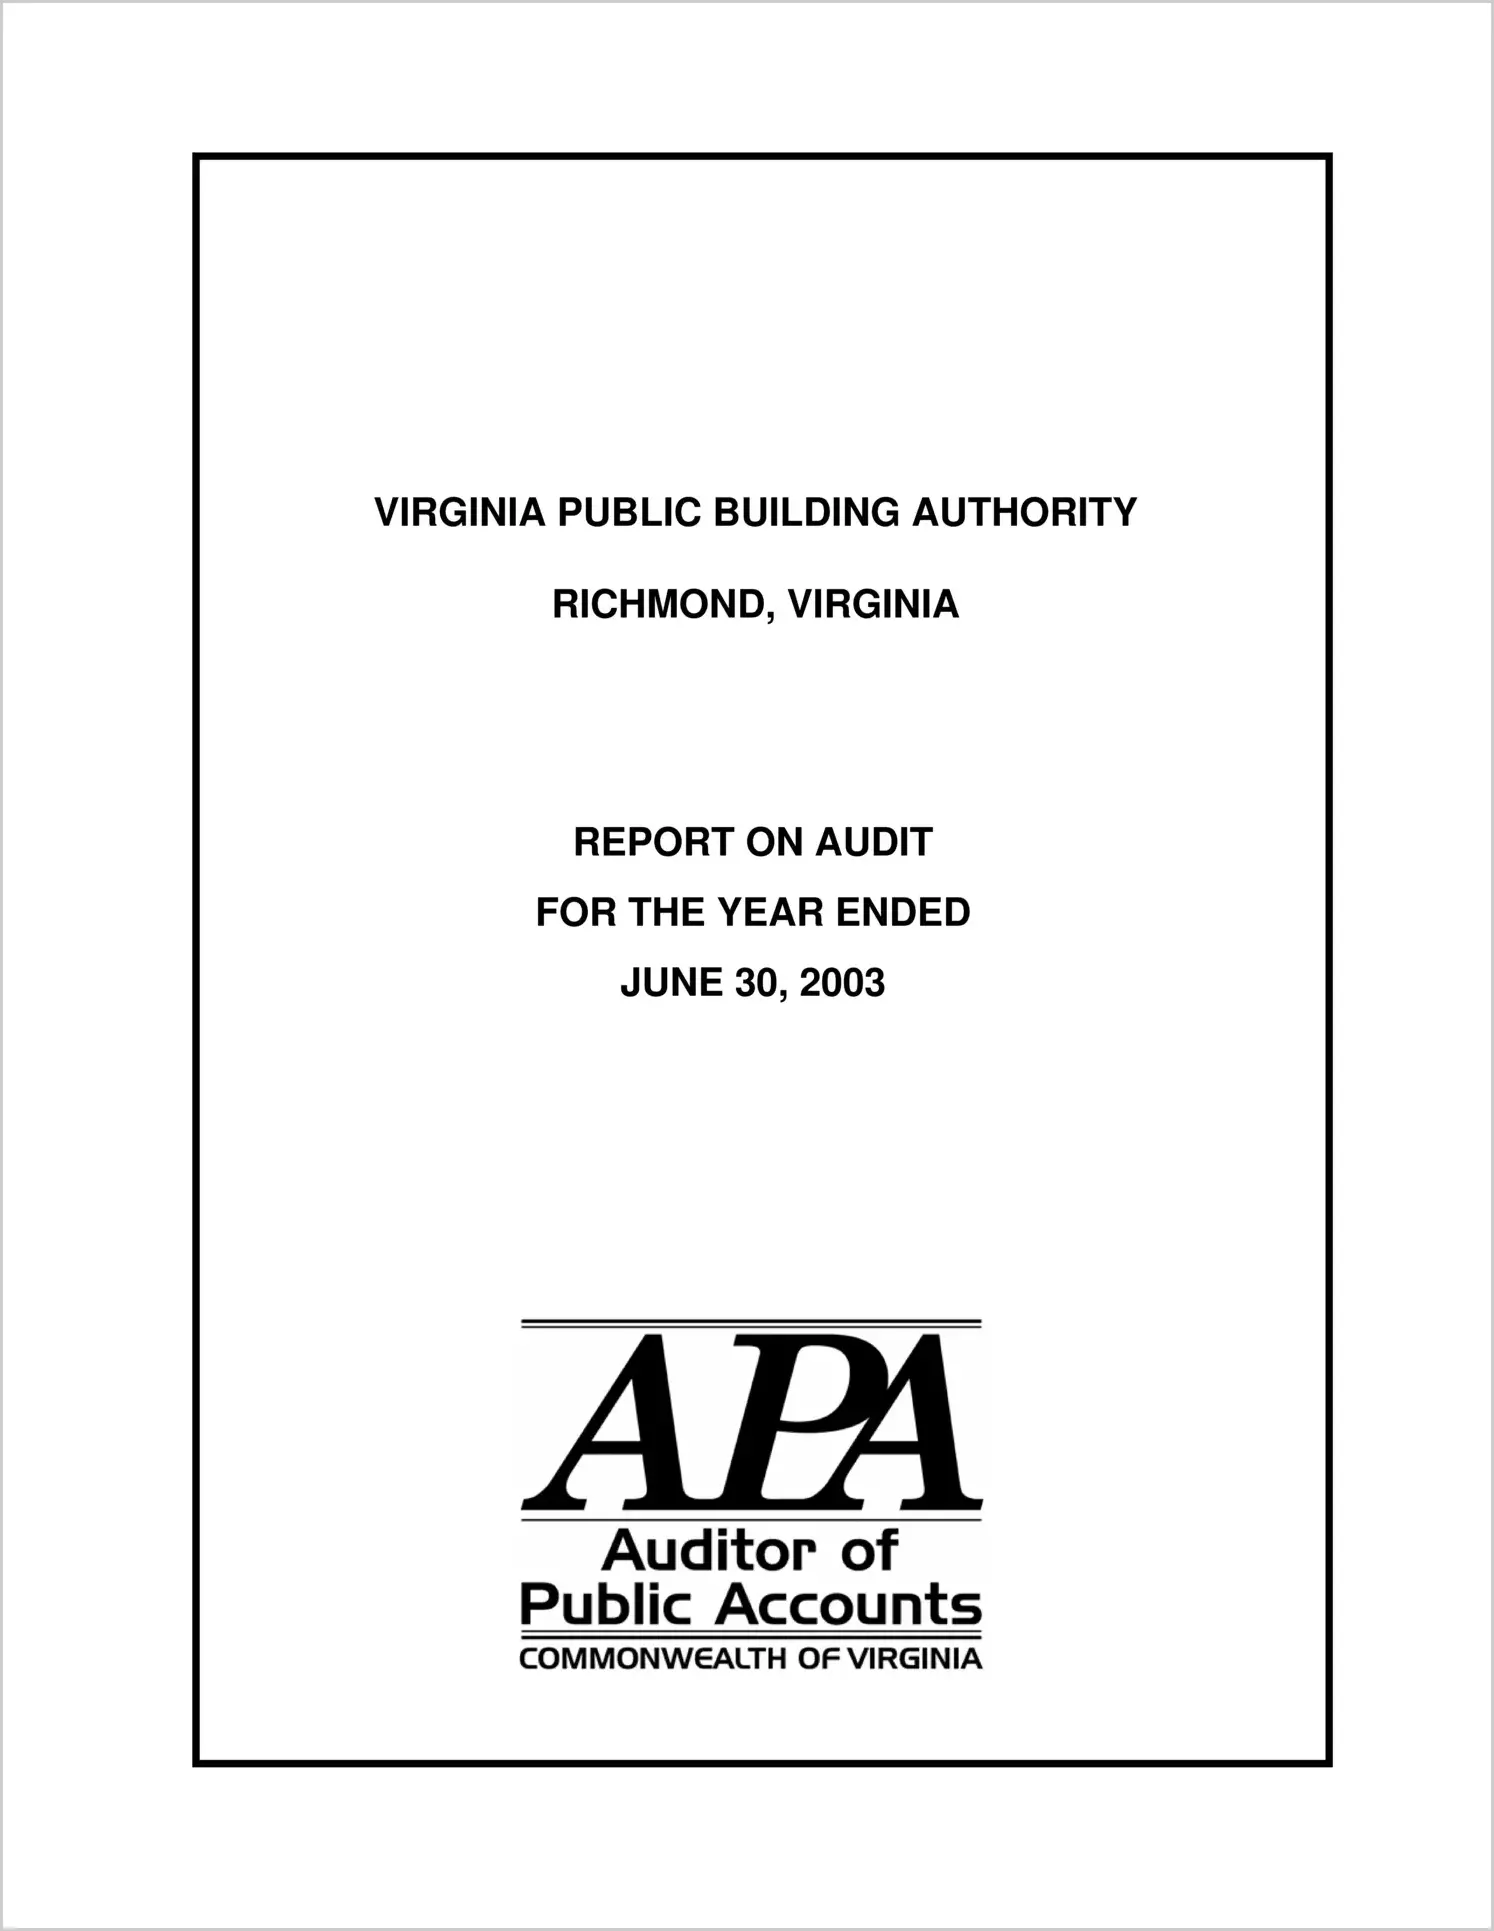 Virginia Public Building Authority for the year ended June 30, 2003